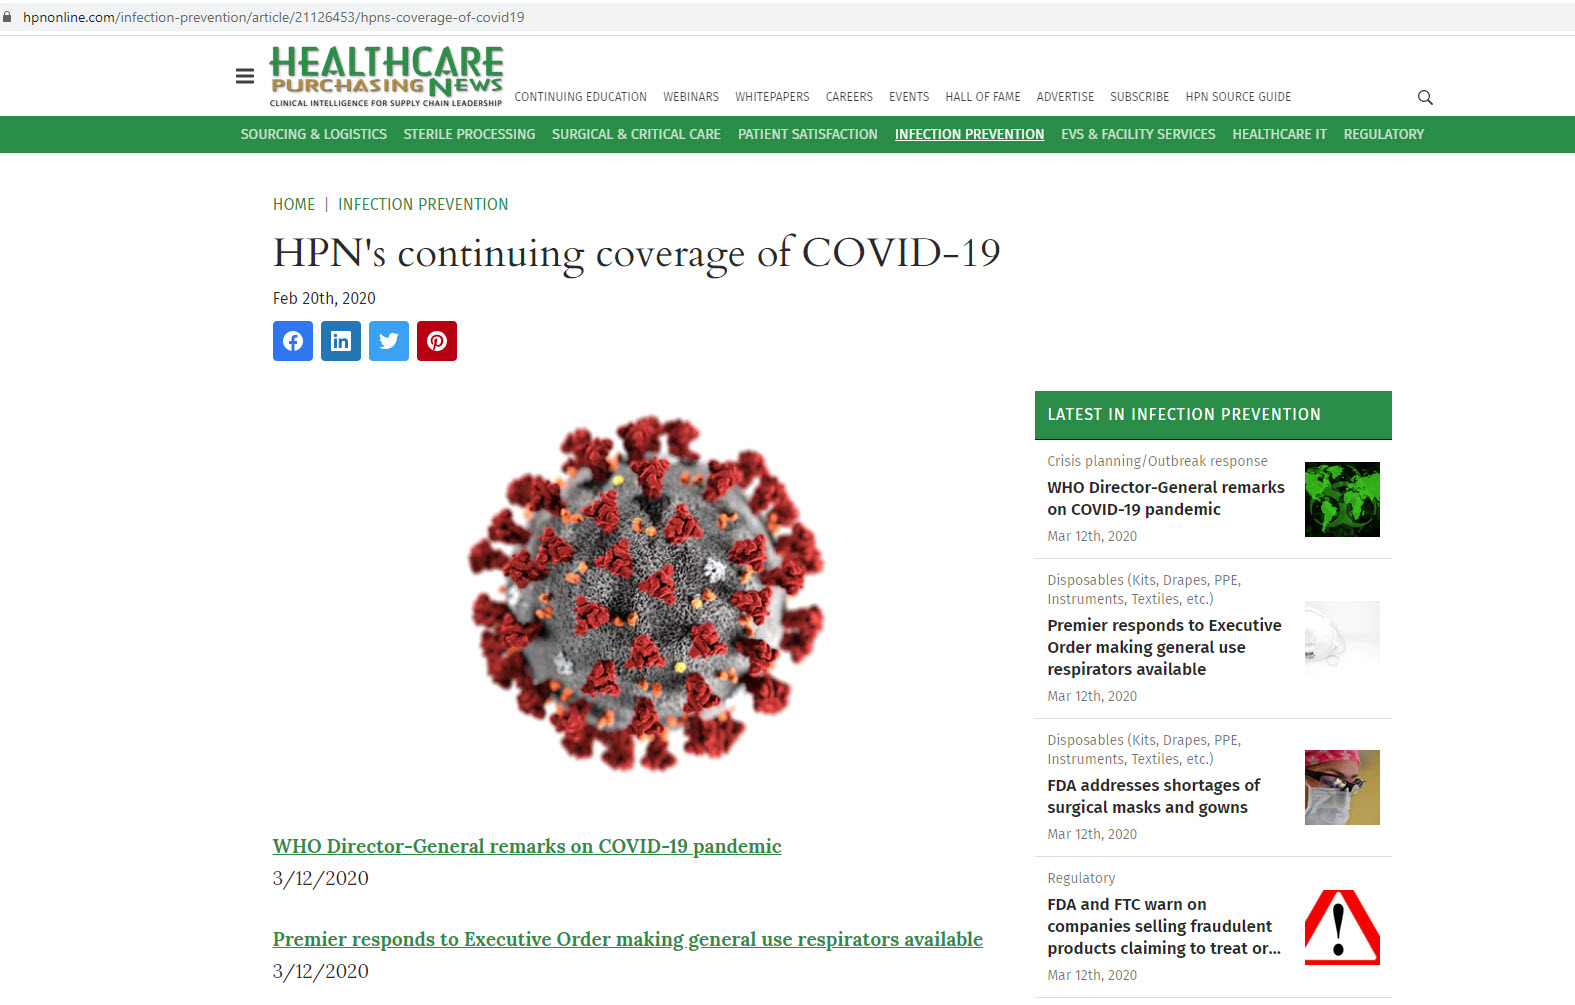 HPN’s Continuing Coverage of COVID-19